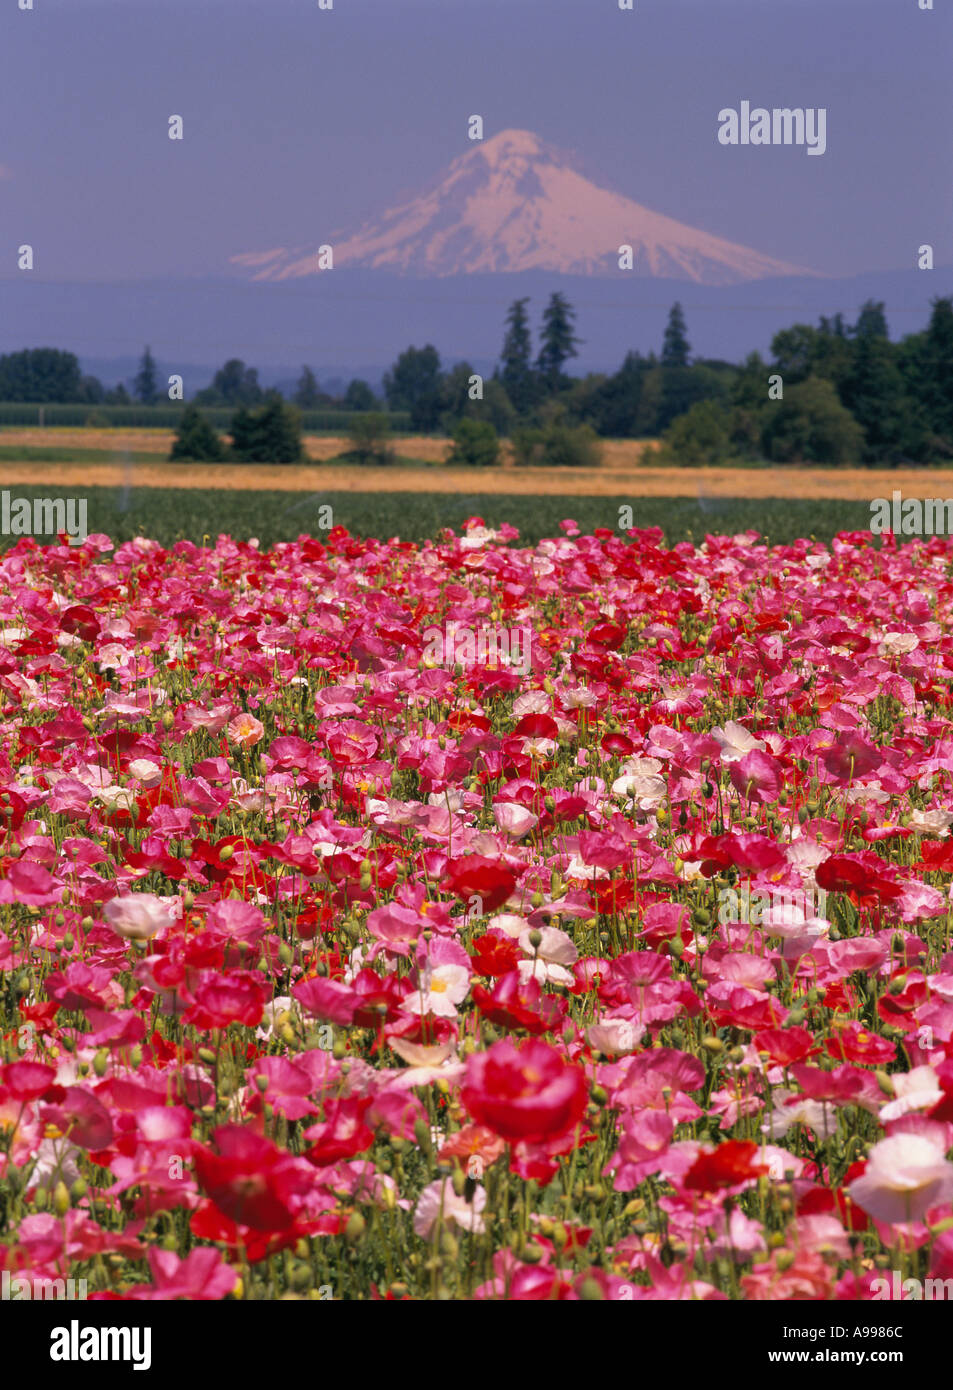 Poppy field in the Williamette Valley of Oregon with snow covered Mt Hood in the distance Stock Photo